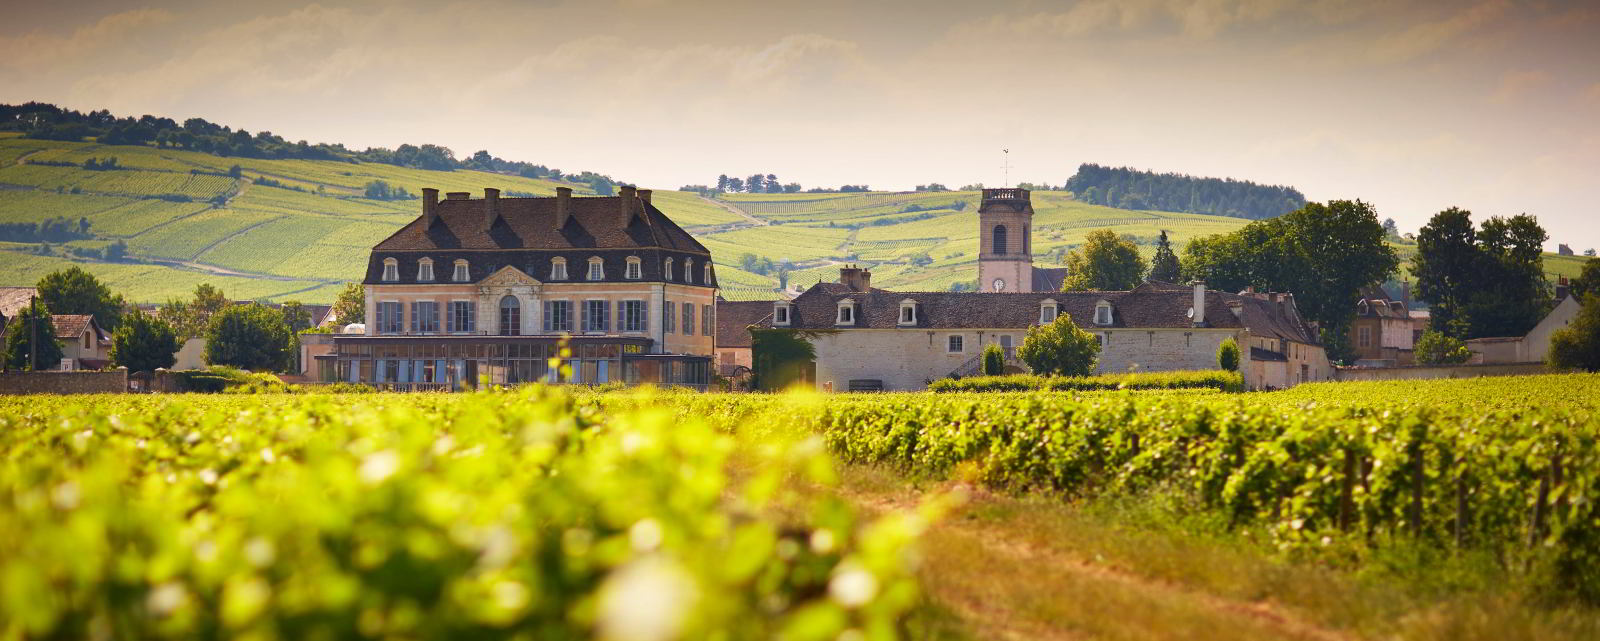 France Burgundy Franche-Comté Vougeot Picture. Tailor-made Luxury wine tours and holidays with In Luxe Travel France, the France Luxury Travel Specialist since 2007